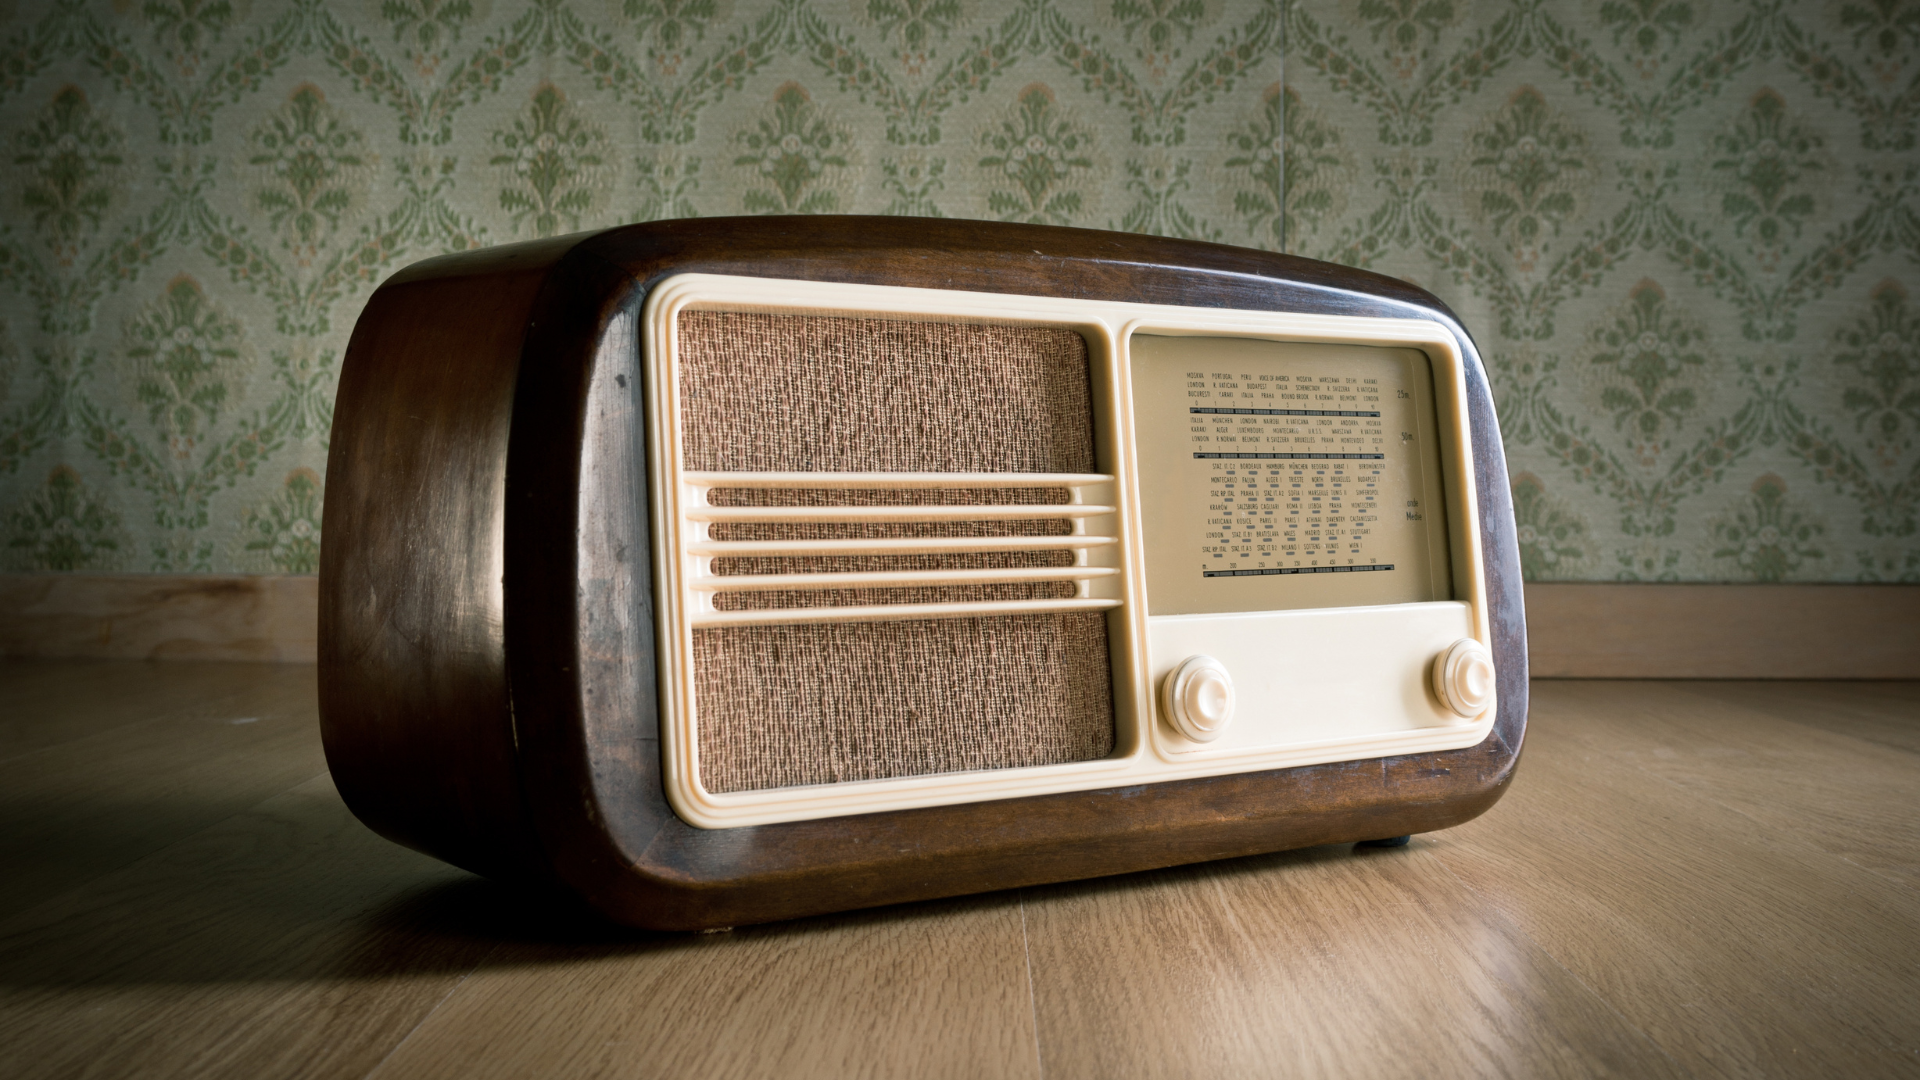 When the Airwaves Attacked: How Radio Almost Took Down the Church (and What We Can Learn Today)